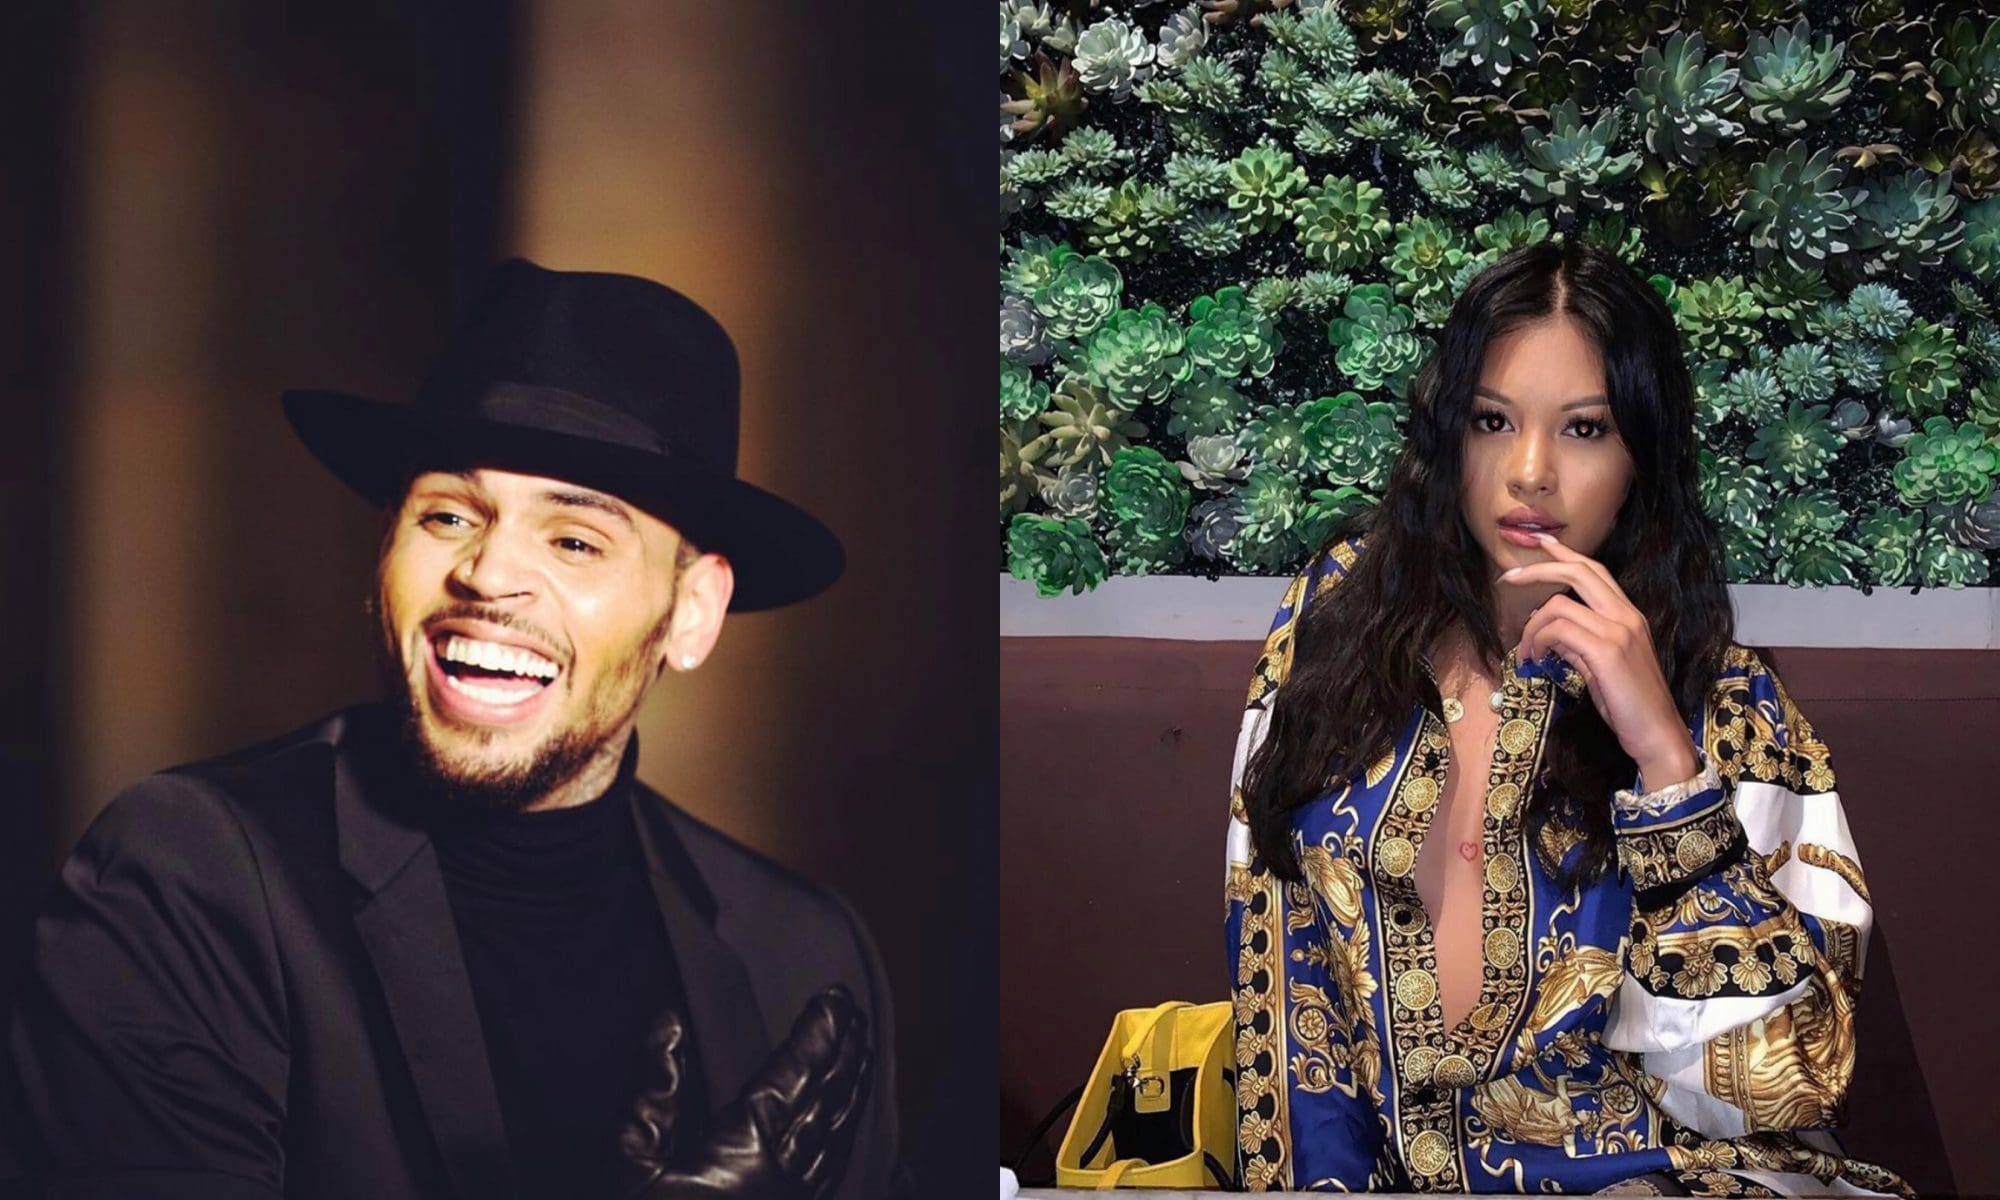 Ammika Harris Shows Off Her Jaw-Dropping Snapback In A Tiny Bathing Suit And Chris Brown Praises Her - The Pics Have Fans Saying Her Bounceback Is 'Ridiculous'